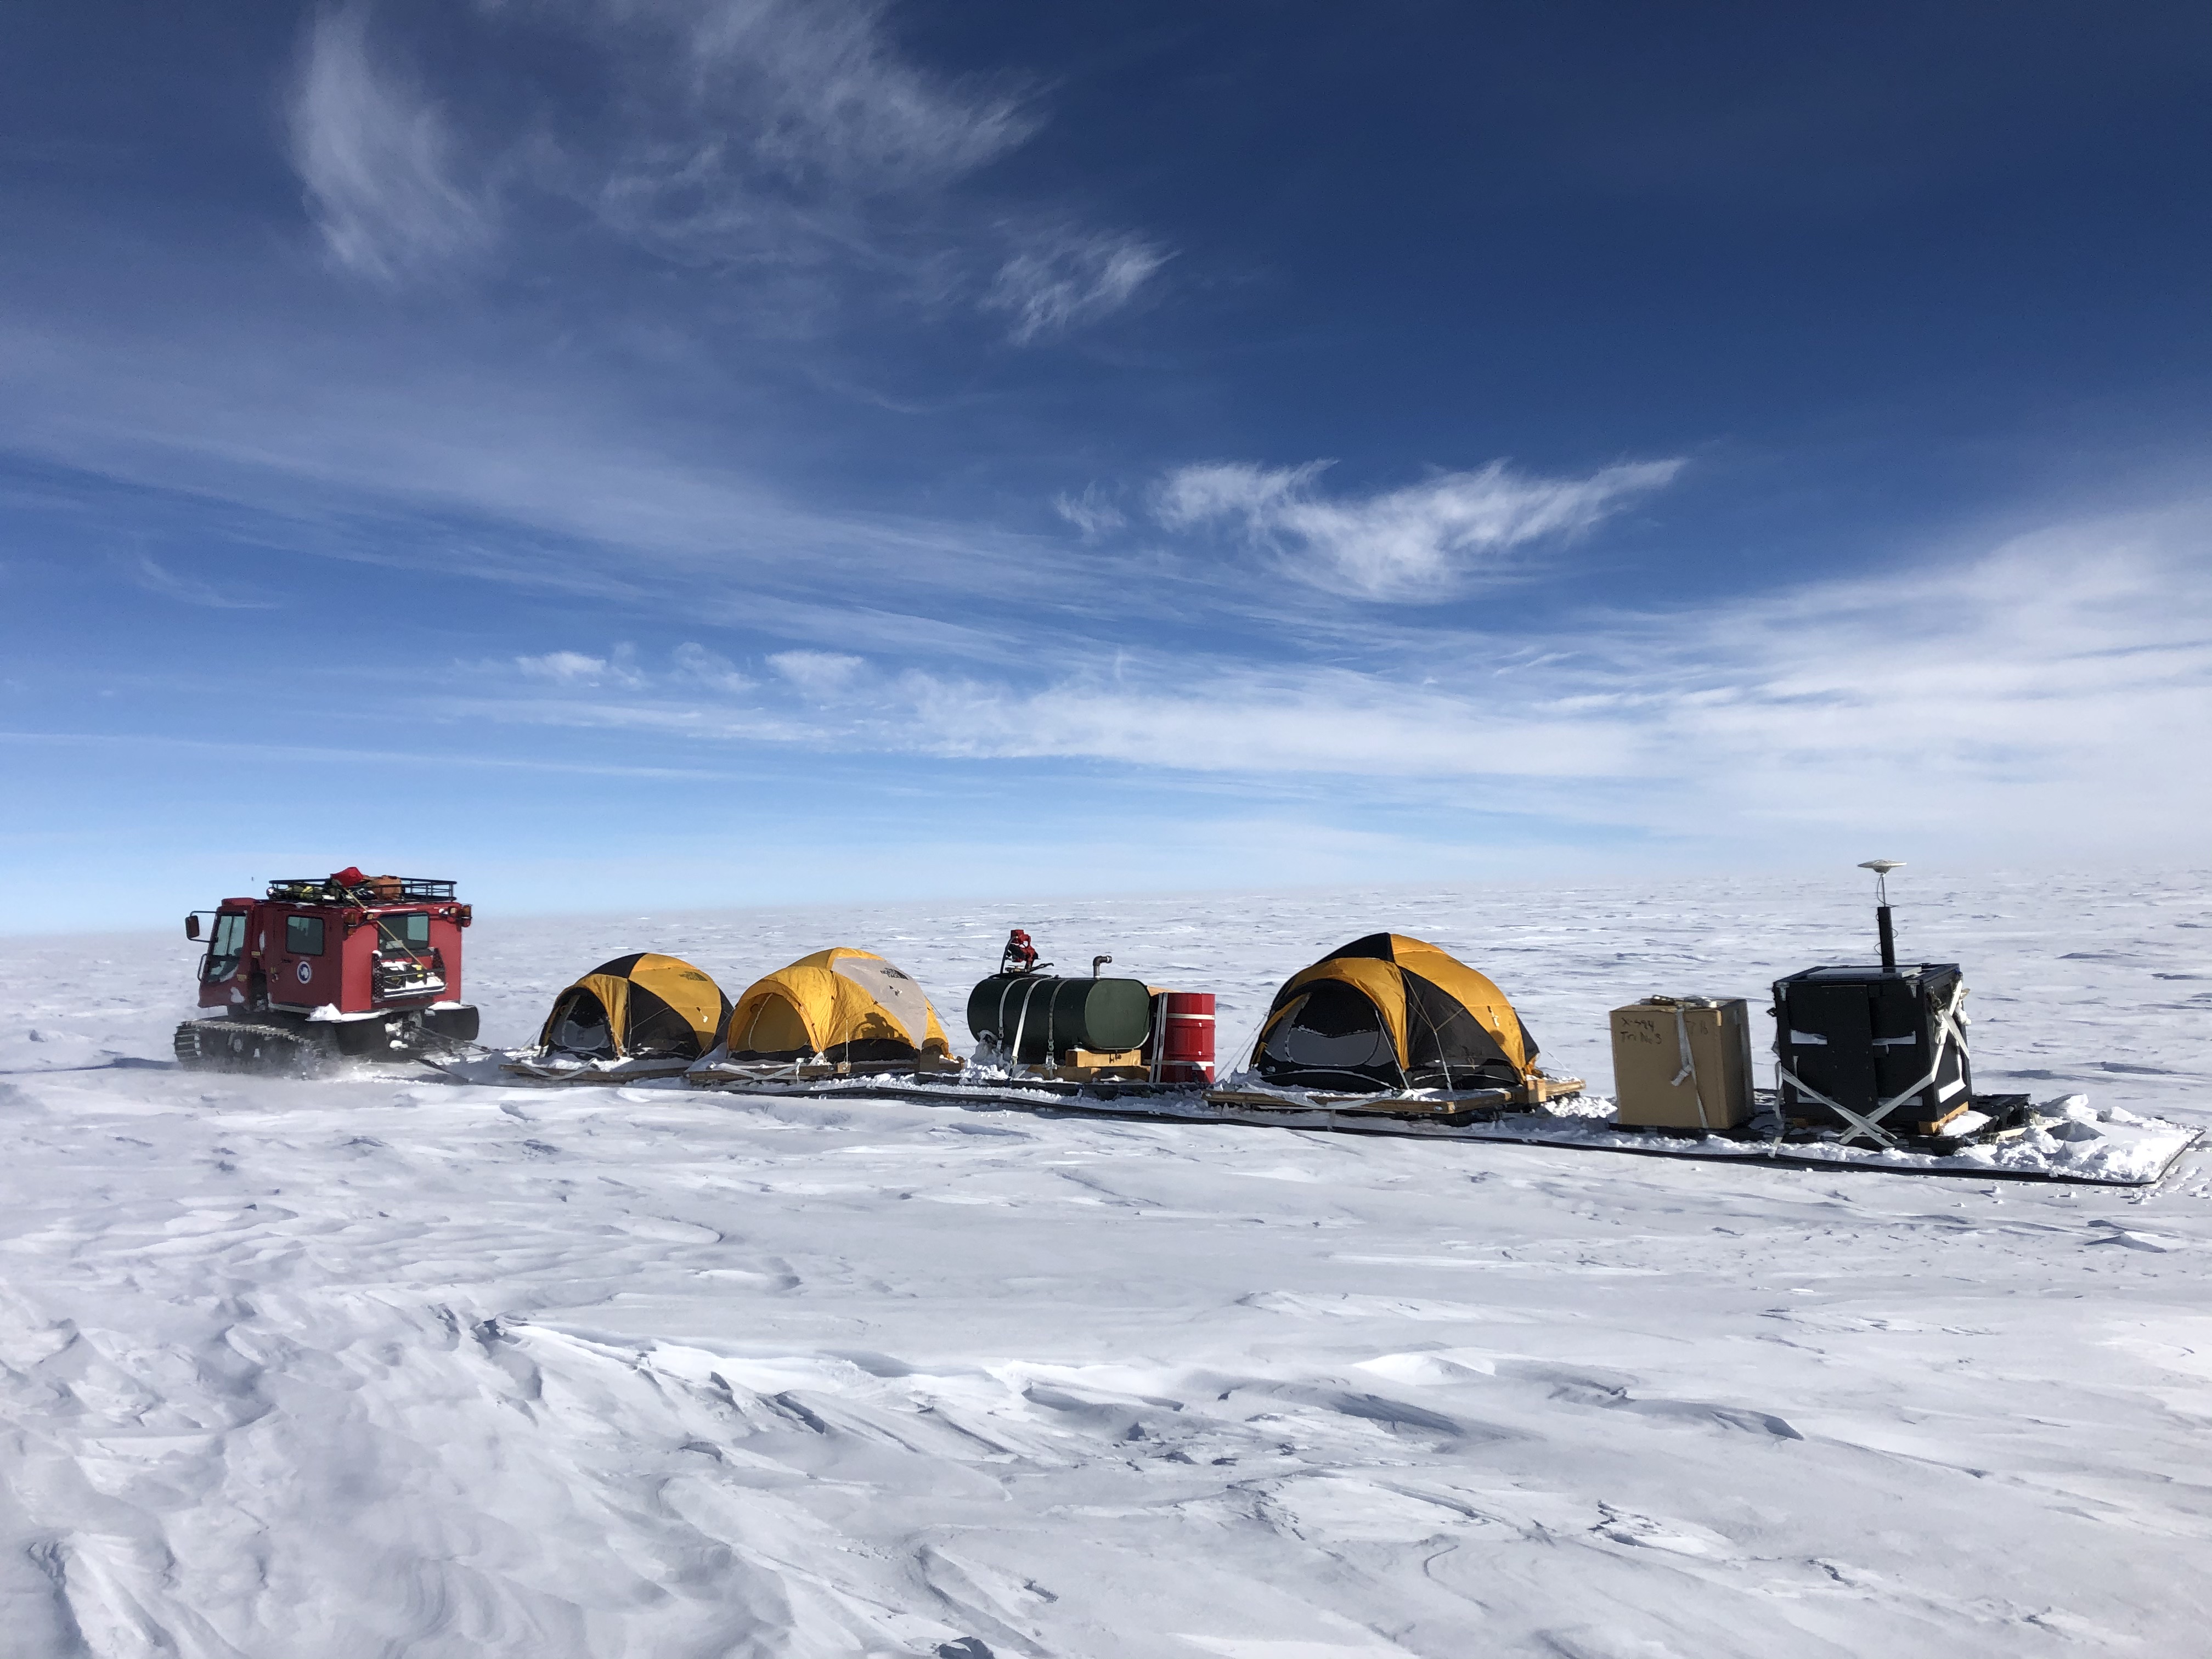  UMD researcher Kelly Brunt traversed the Antarctic taking measurements to verify satellite-based elevation data. For weeks at a time, the four-person crew lived in tents and towed everything they needed for survival on sleds through the frozen landscape. Photo Courtesy: Kelly Brunt. Click image to download hi-res version.